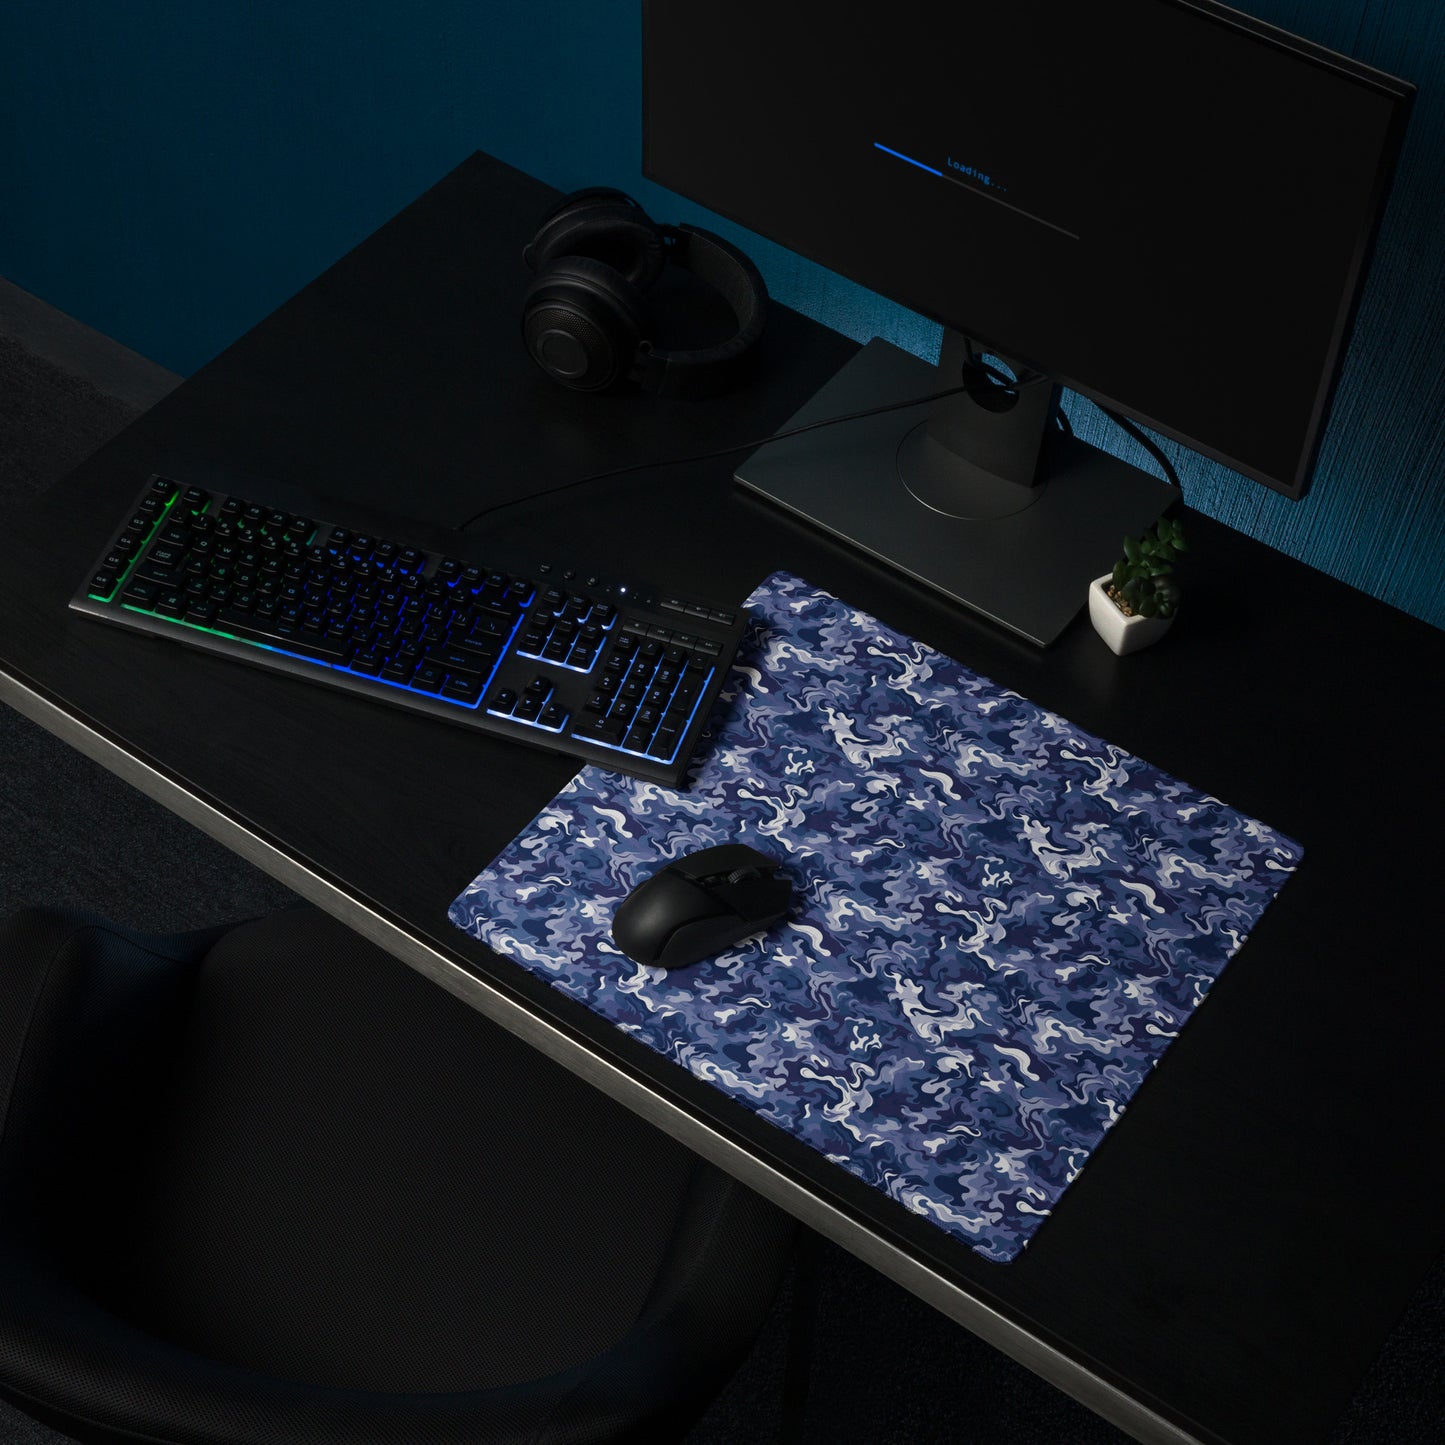 A 18" x 16" desk pad with a royal blue and white camo pattern sitting on a desk.